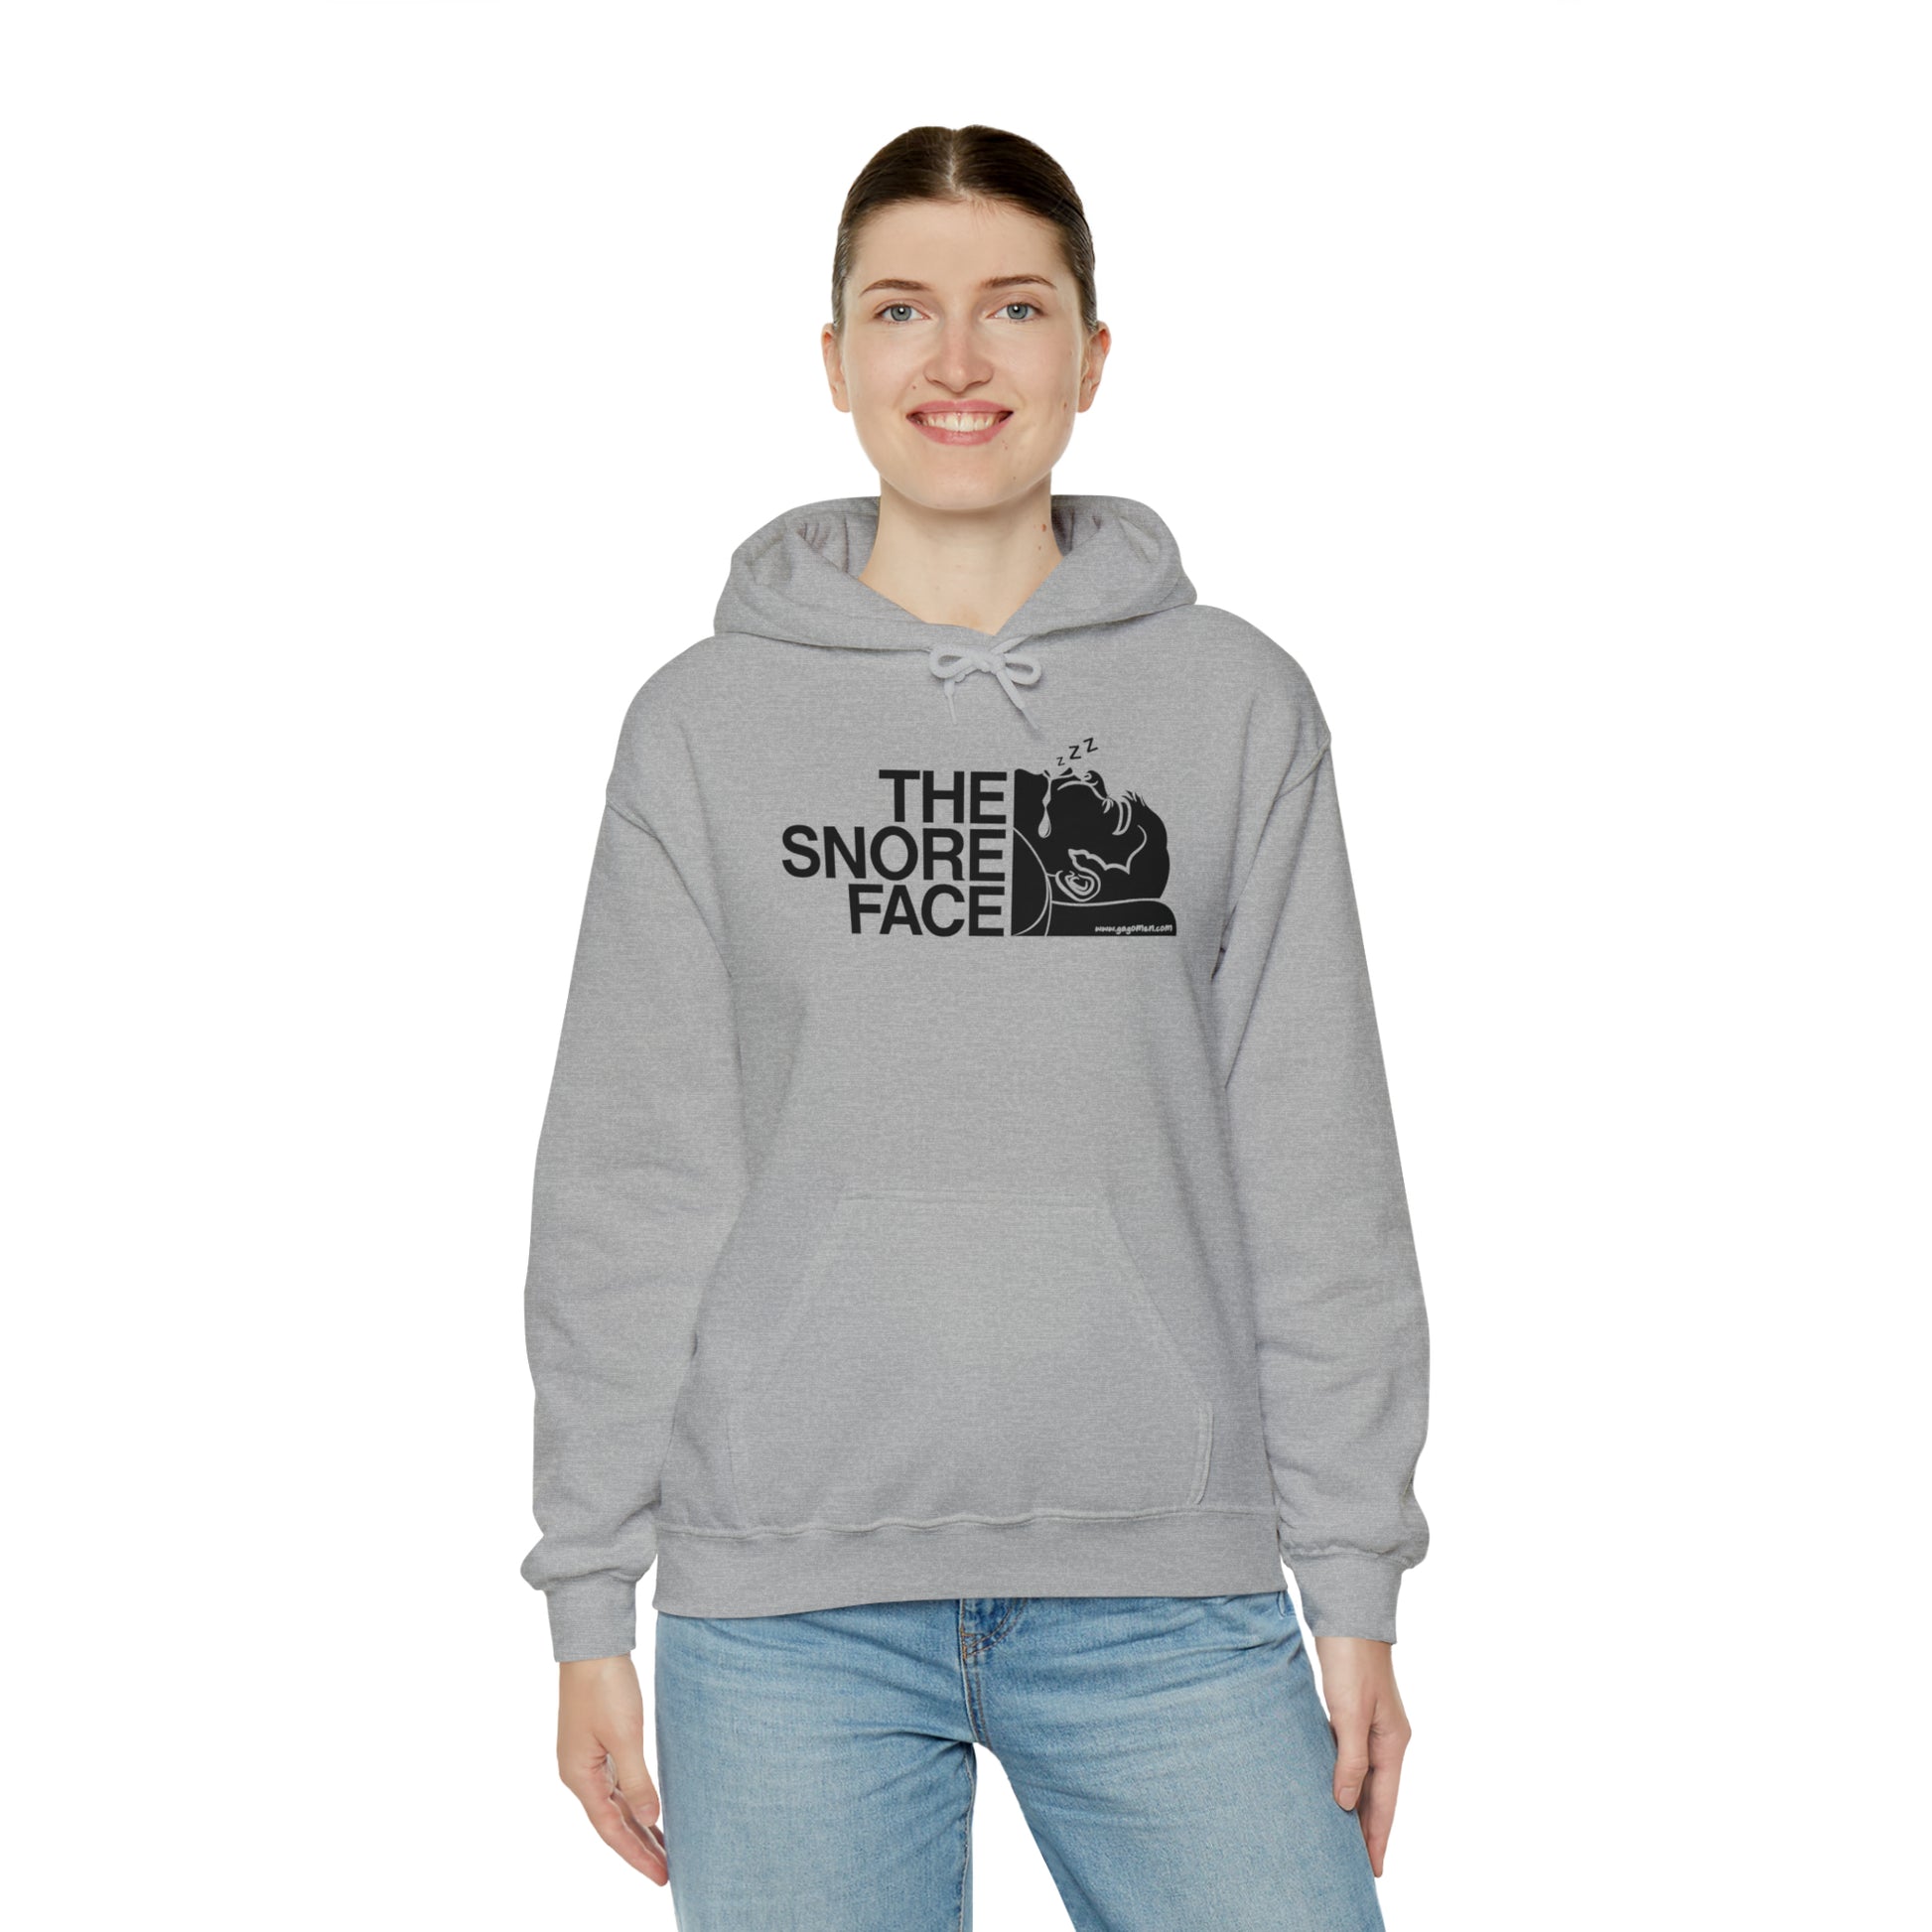 funny the north face hoodie, brand parody hoodie, funny hoodie, parody hoodie, funny outdoor hoodie, funny hiking hoodie, funny camping hoodie, spoof hoodie, meme hoodie, hilarious hoodie, dads gift, funny gift, 